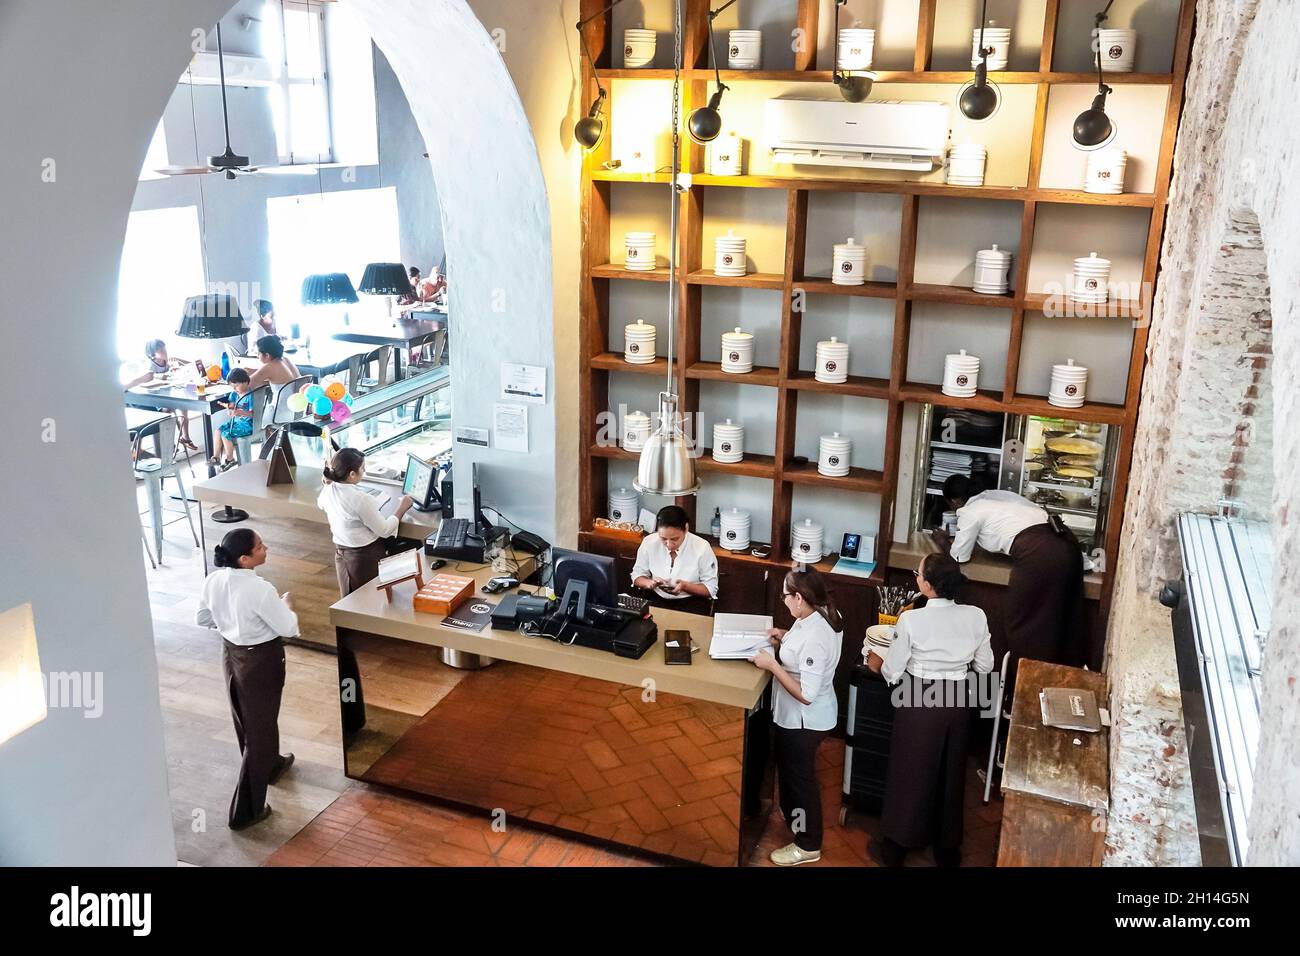 Cartagena Colombia,Crepes & Waffles,restaurant inside interior cashier,Hispanic female women servers employees staff overhead view from above Stock Photo